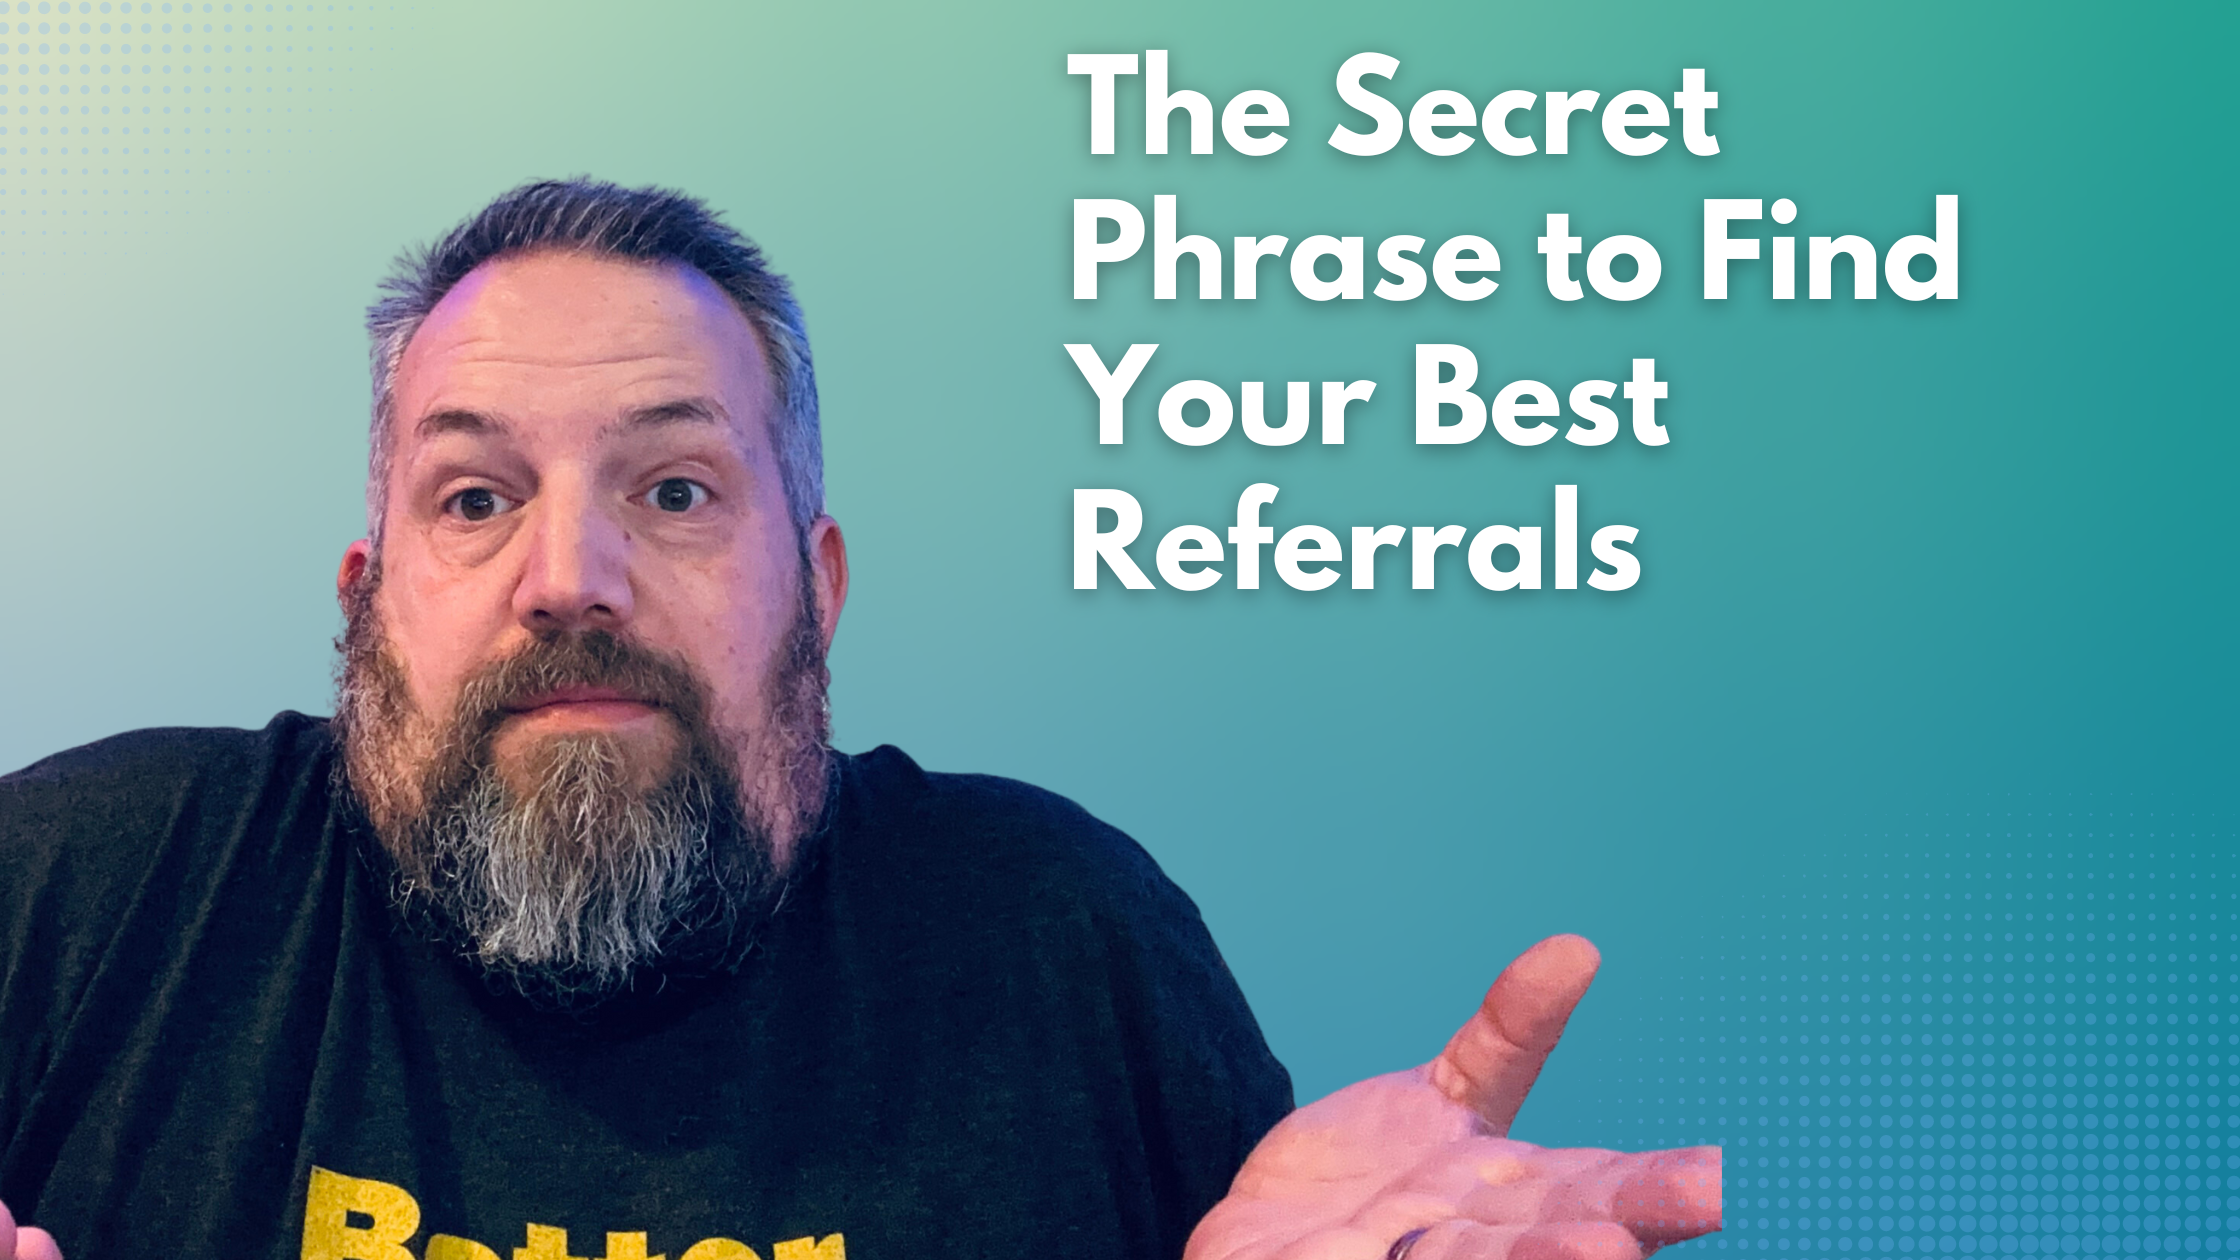 The Secret Phrase to Find Your Best Referrals